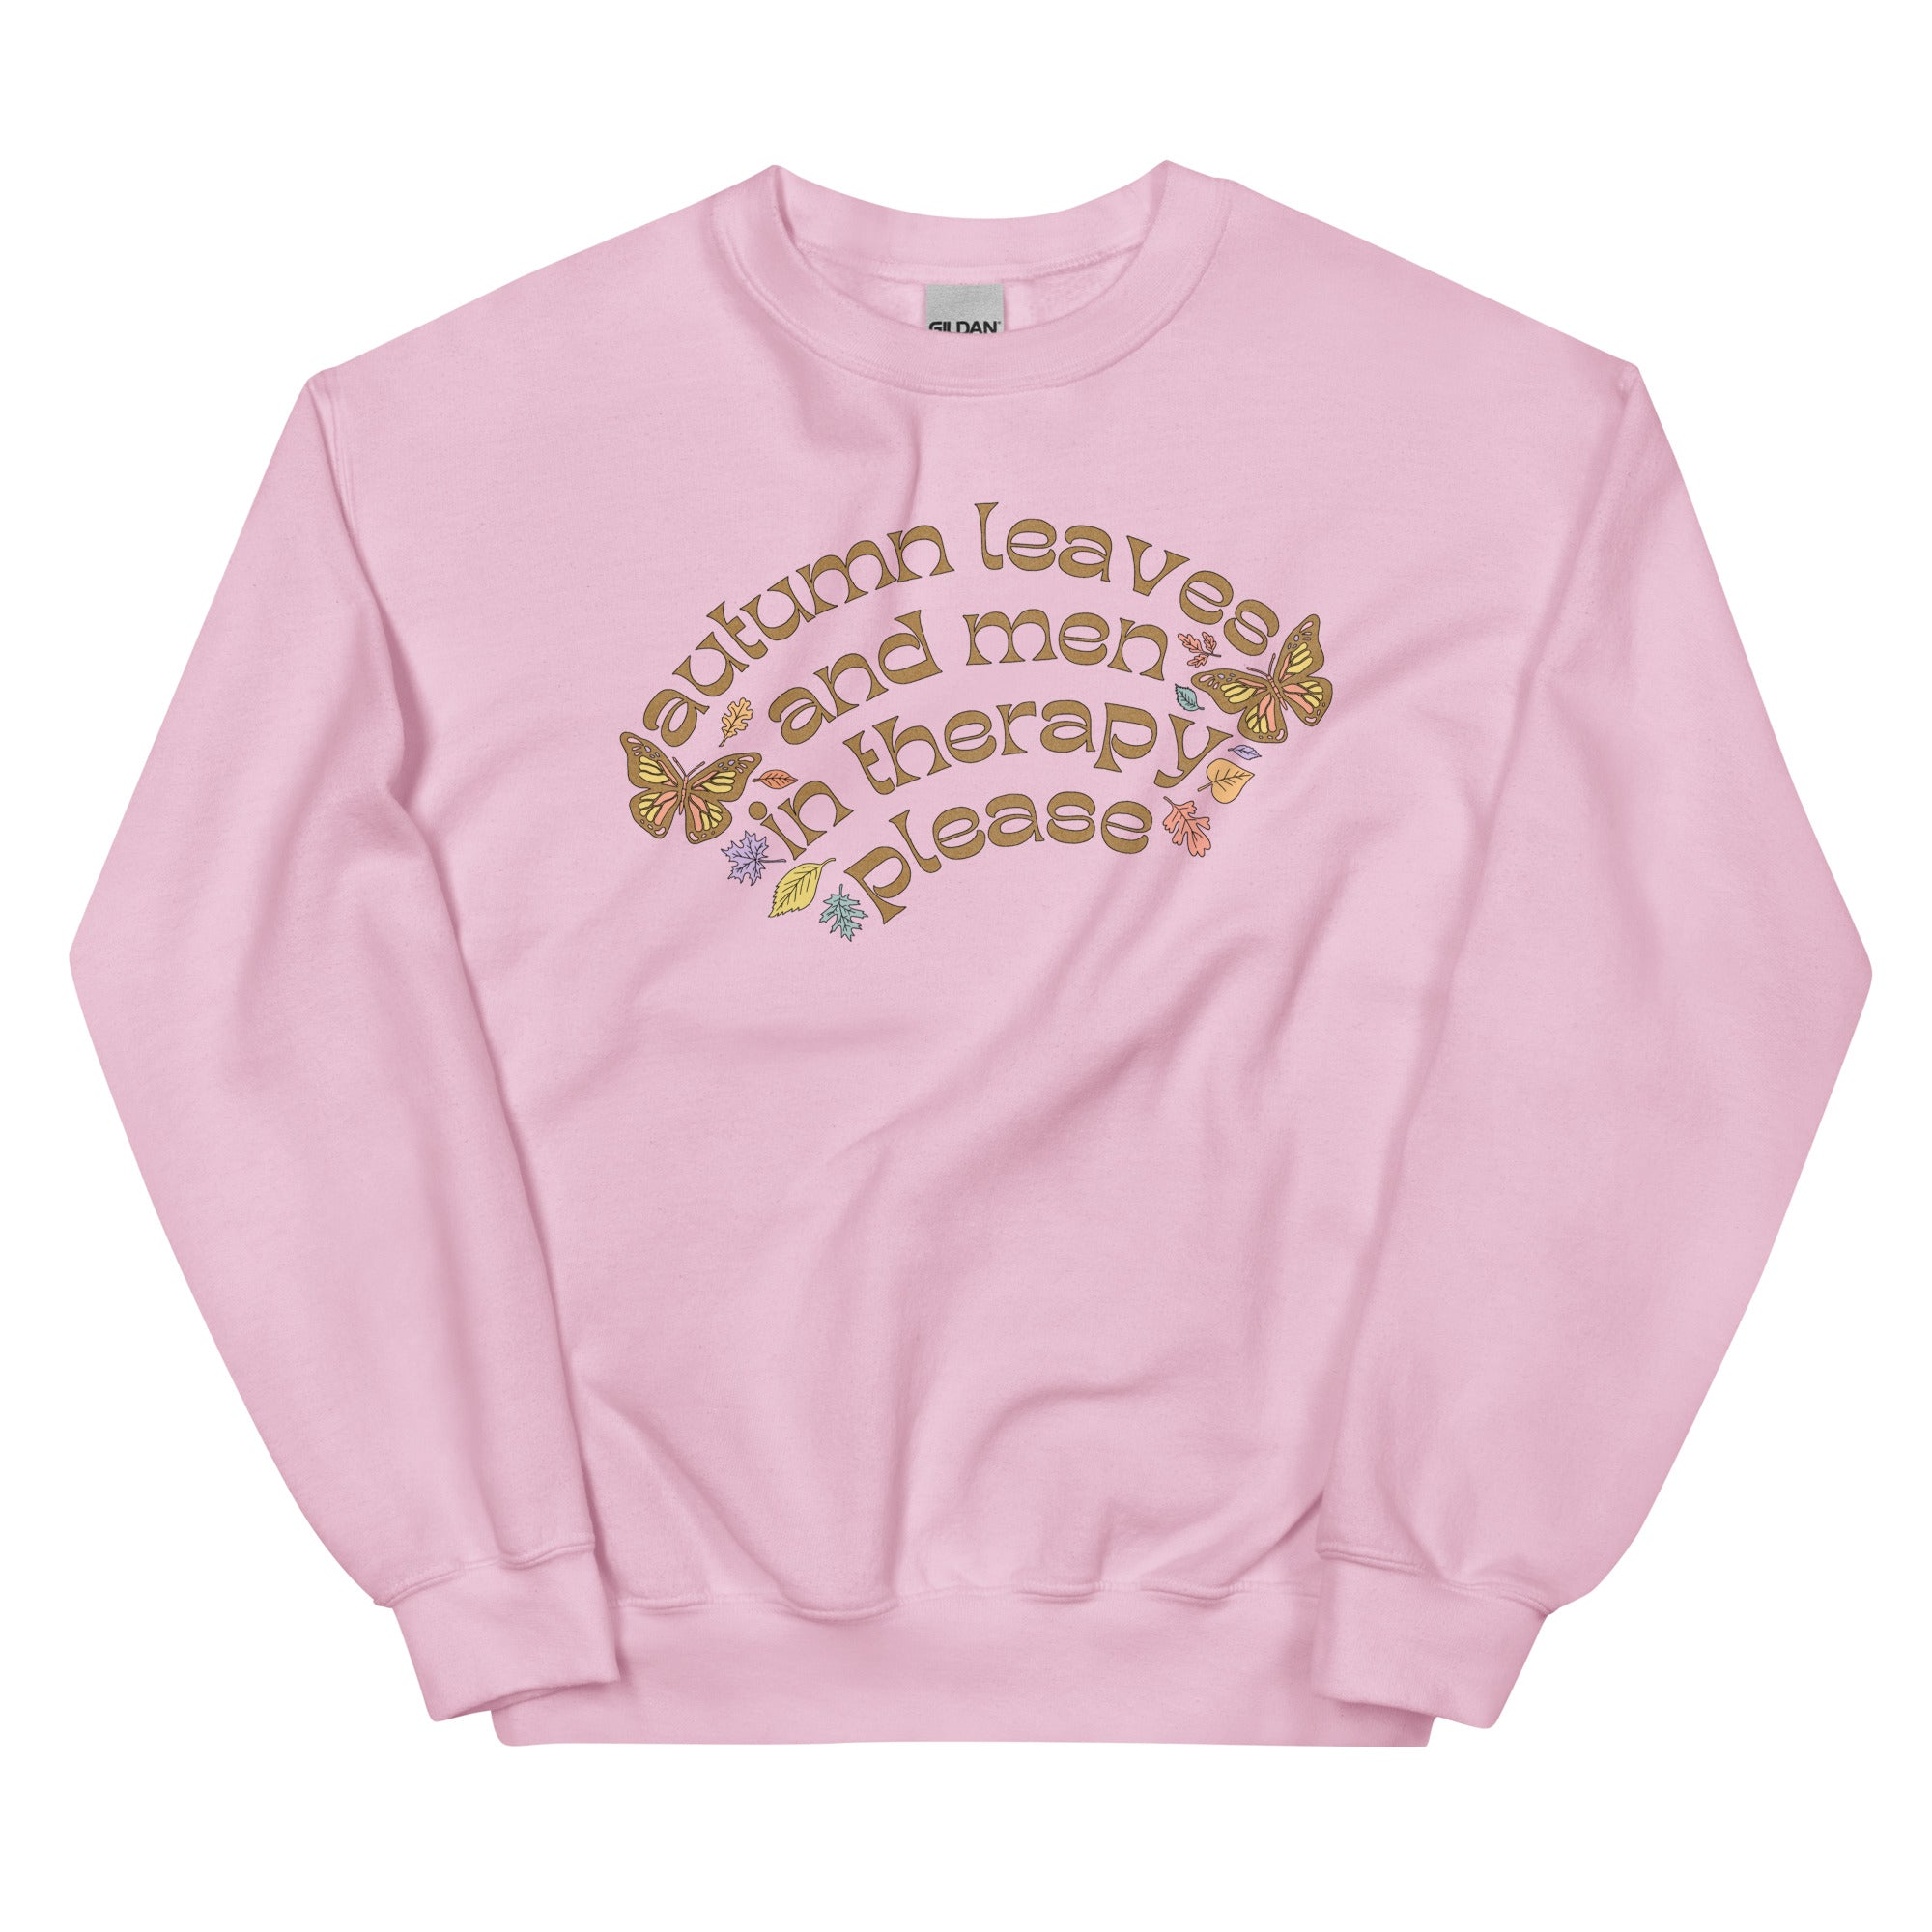 Autumn Leaves And Men In Therapy Please Unisex Feminist Sweatshirt - Shop Women’s Rights T-shirts - Pink Sweatshirt